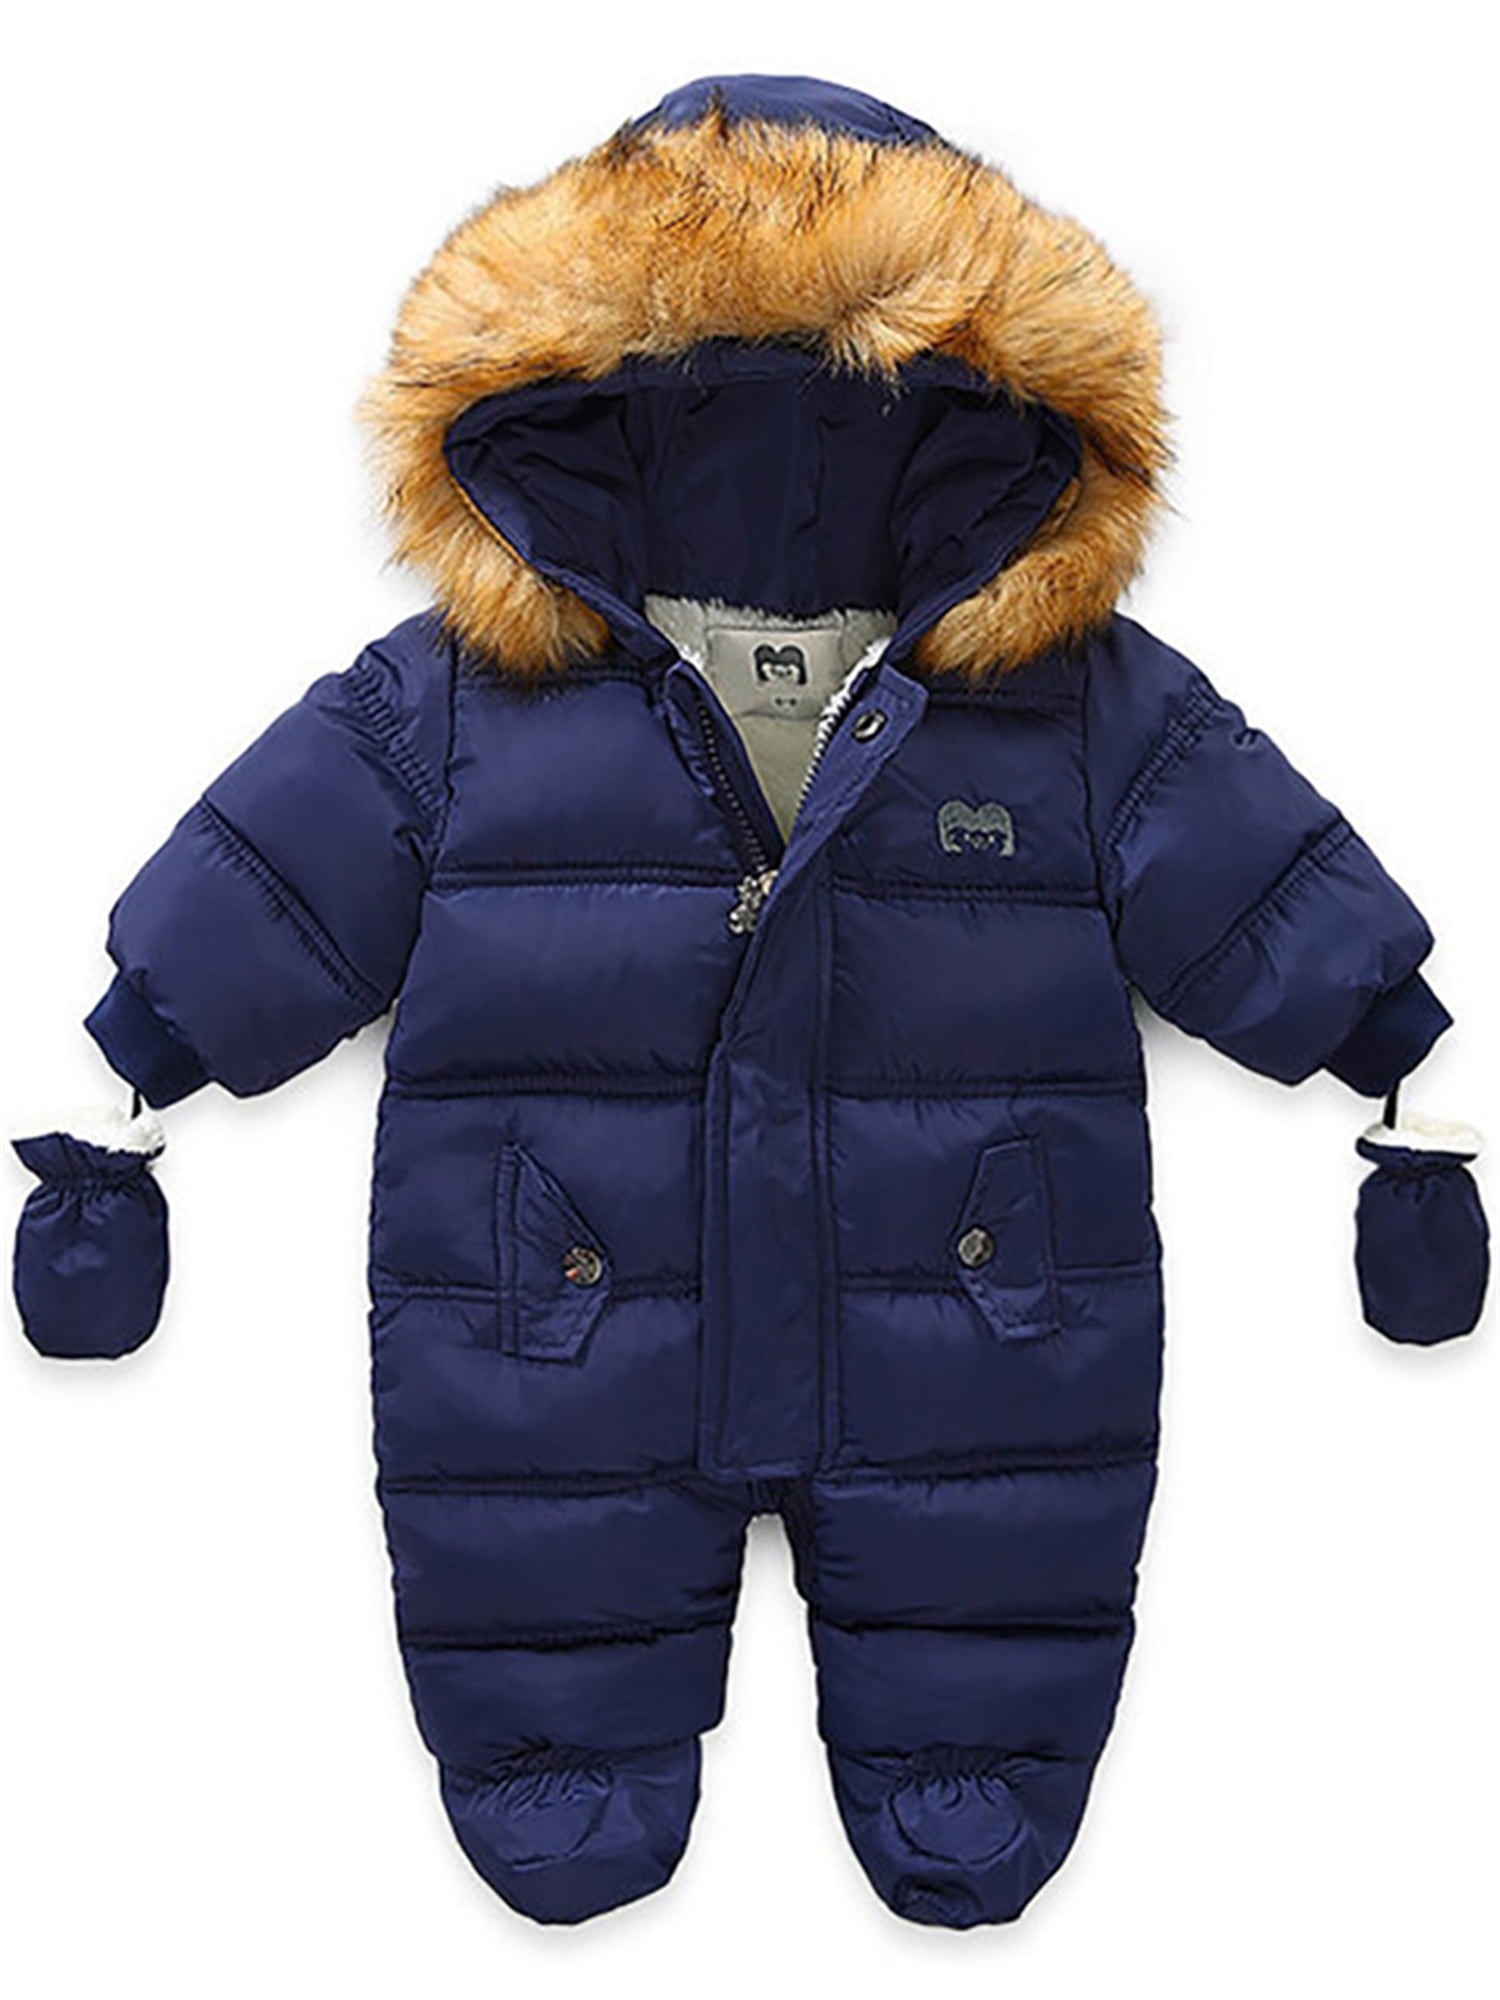 Baby Boys Girls Snowsuit Winter Romper Hooded Overall Down Coat Doule Zippers Jacket Outfit 3-24 Months 